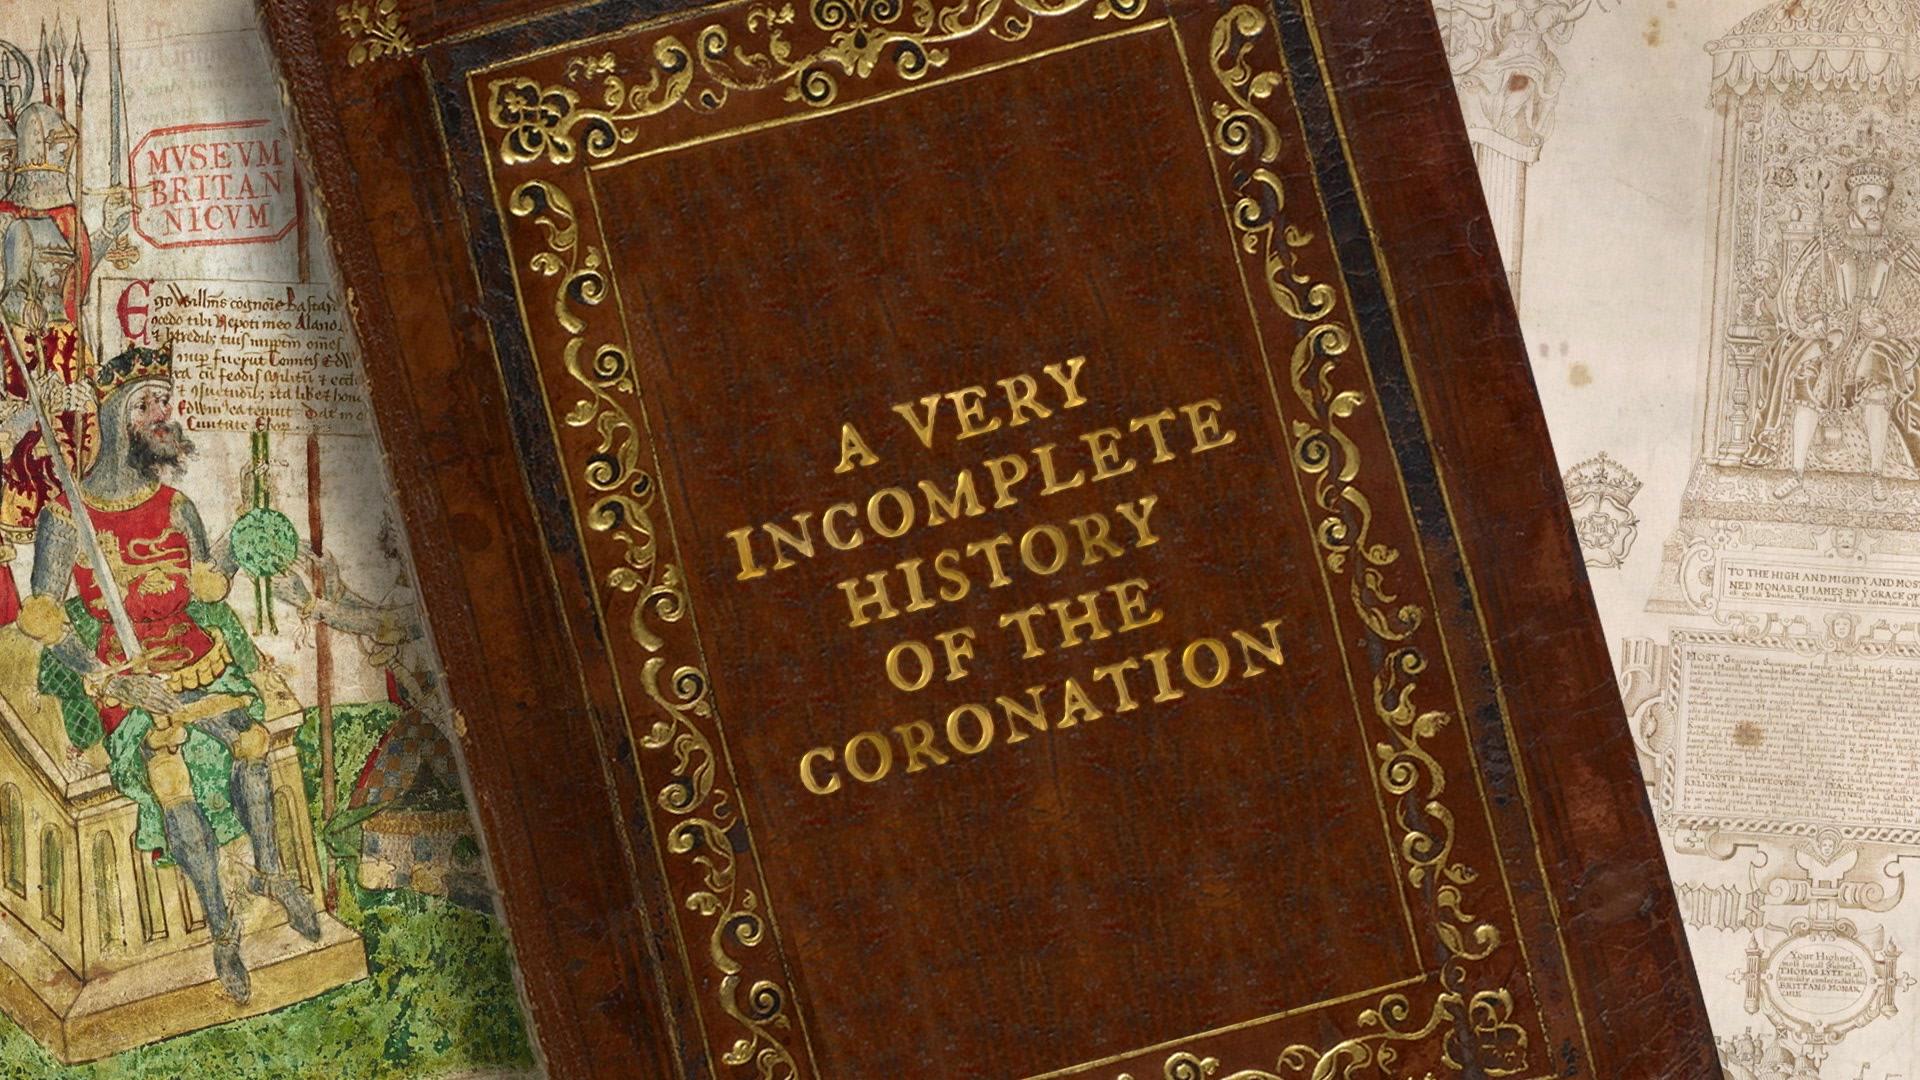 Book titled A Very Incomplete History of the Coronation